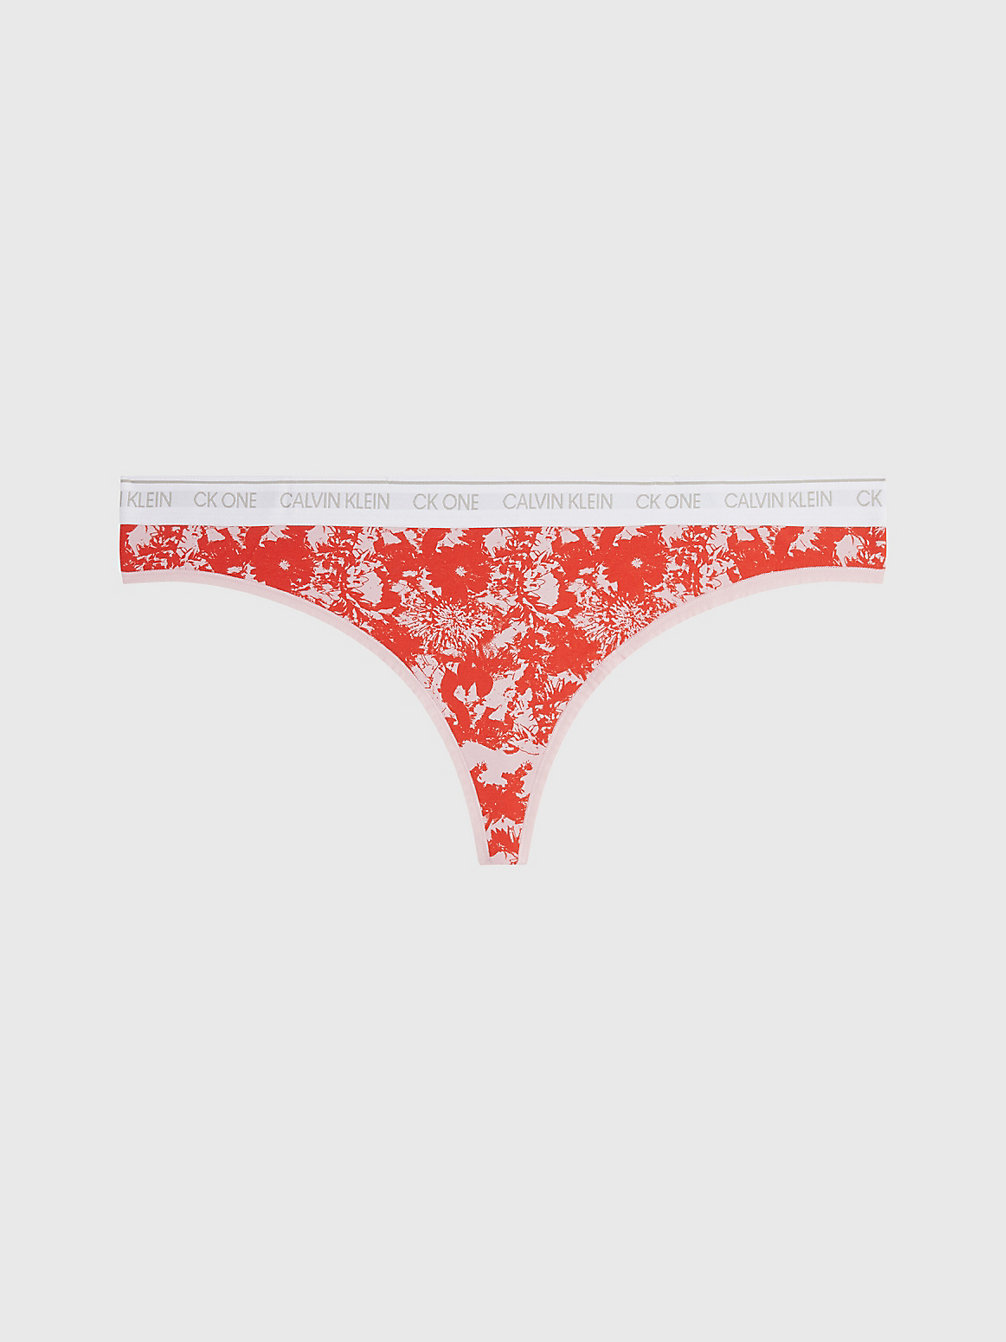 SOLAR FLORAL PRINT_PINK SHELL Plus Size Thong - CK One undefined women Calvin Klein